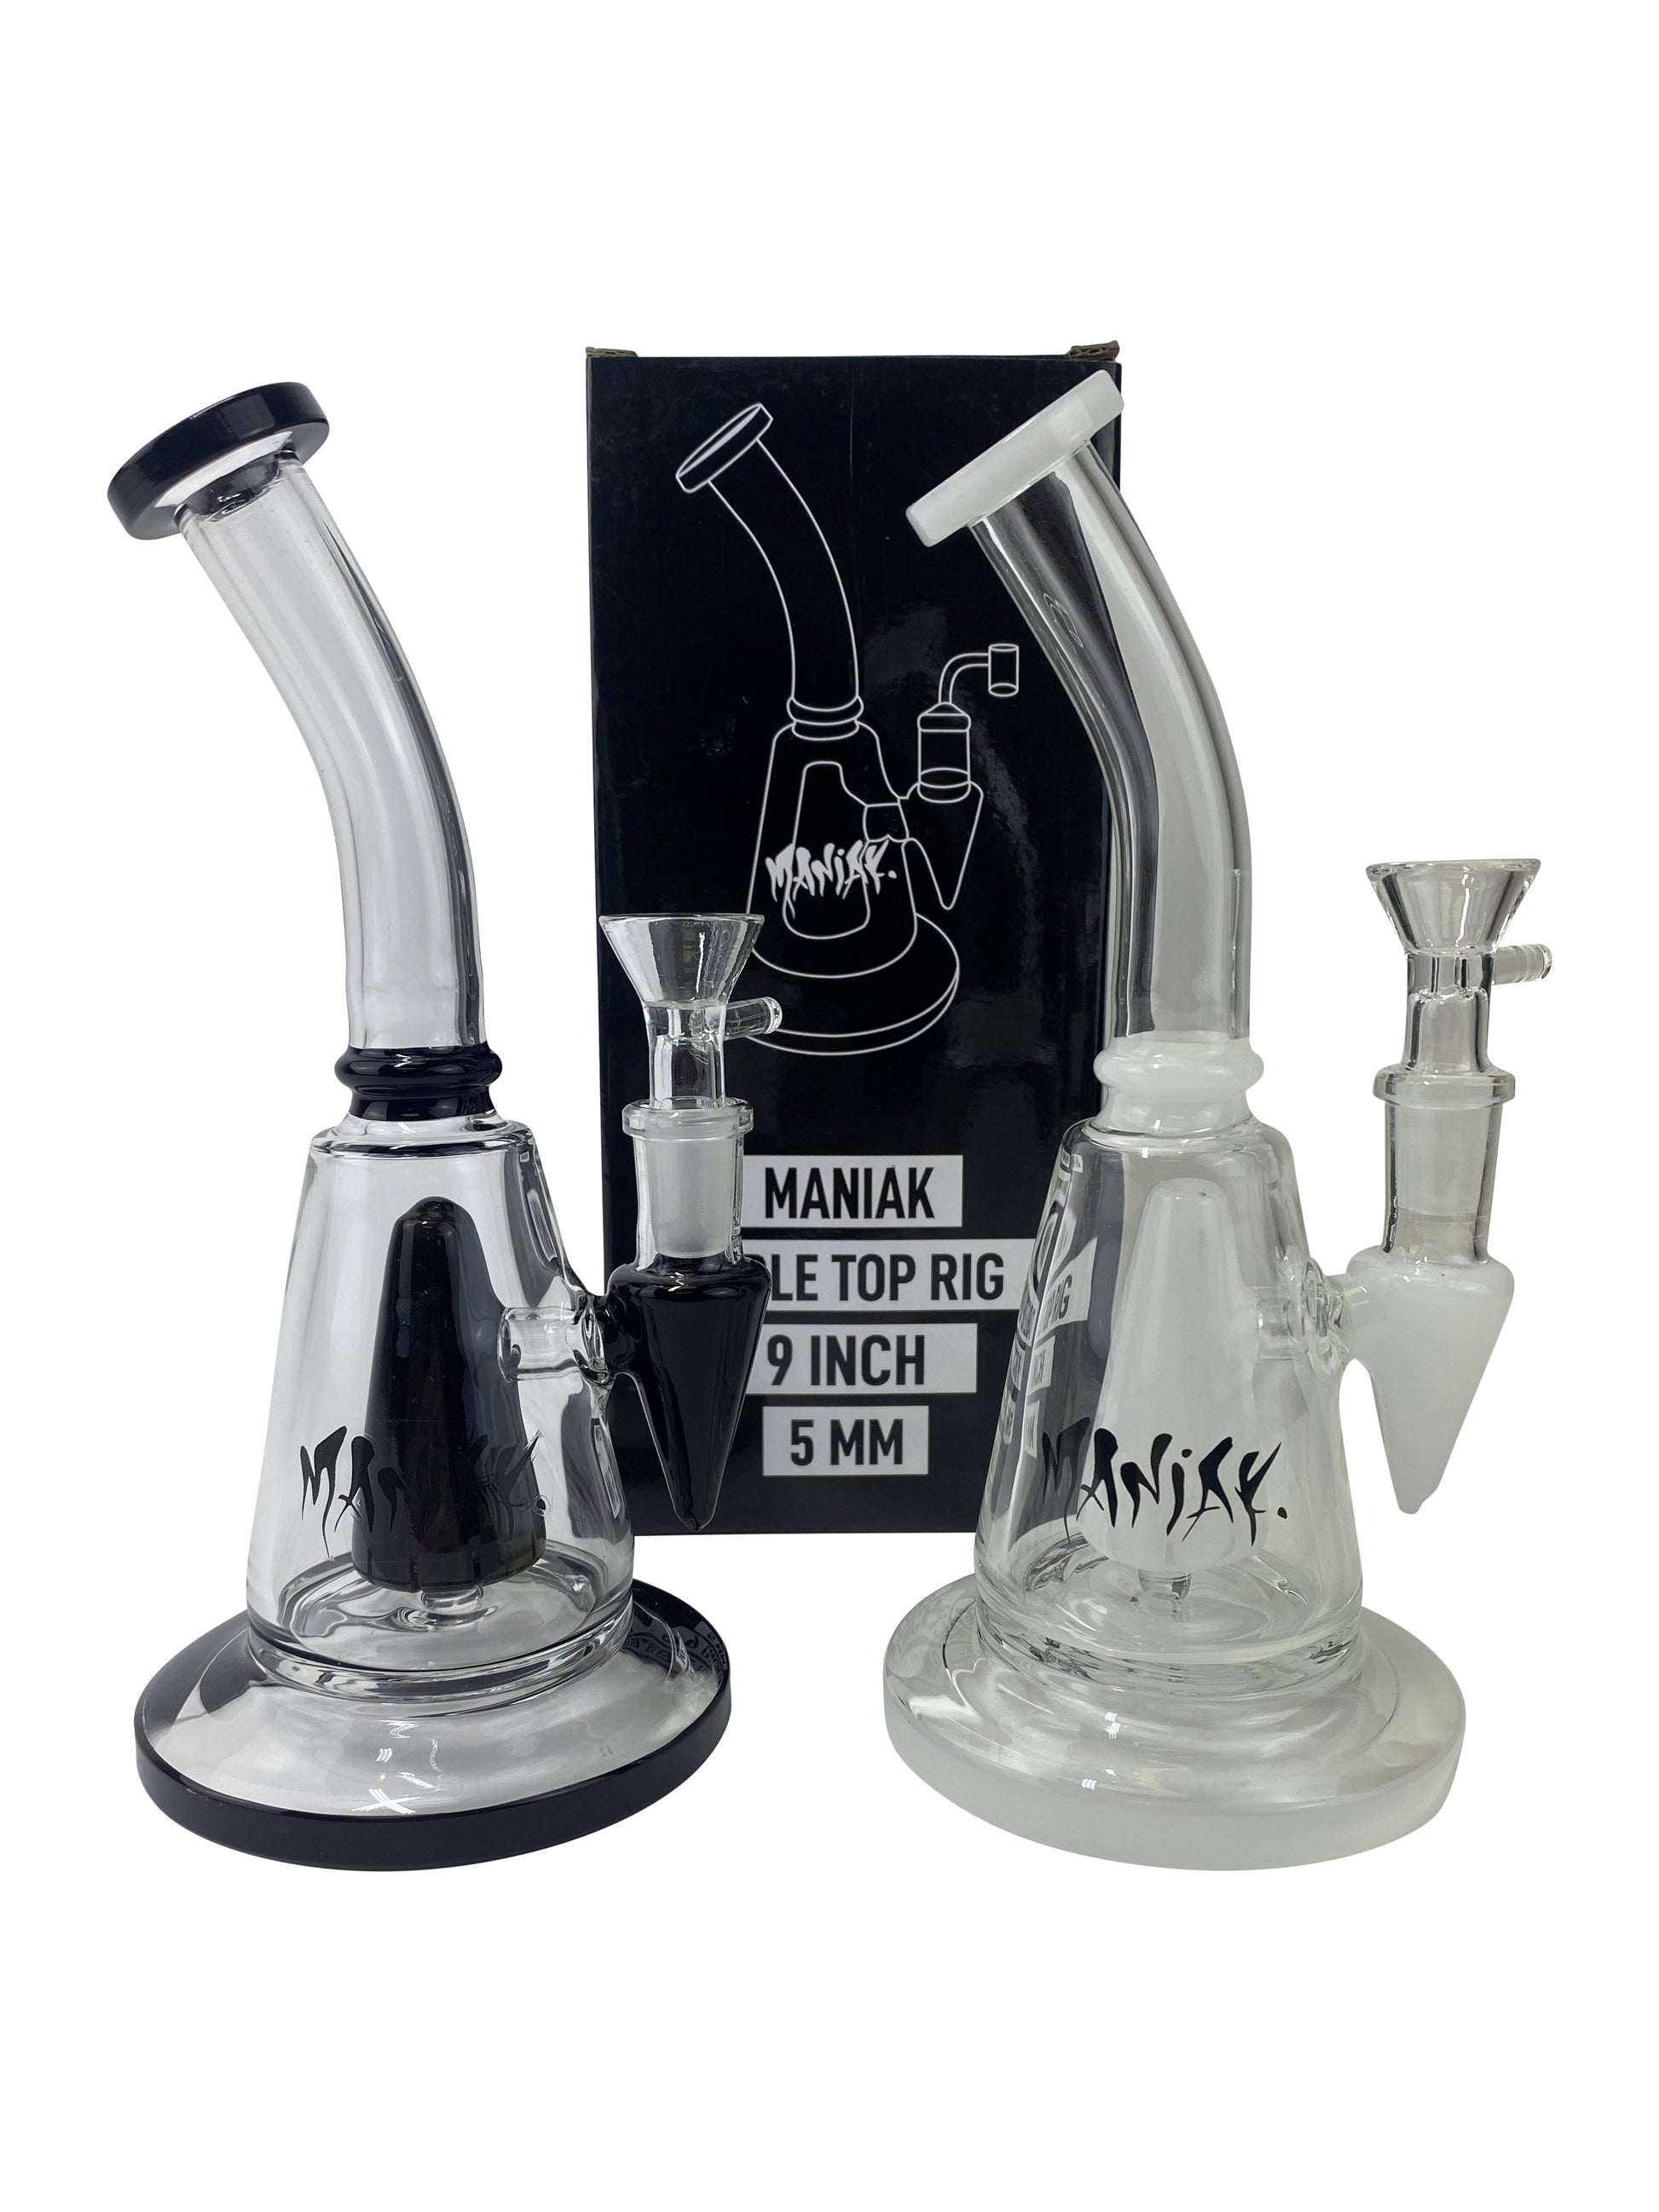 Maniak Table Top Glass Rig